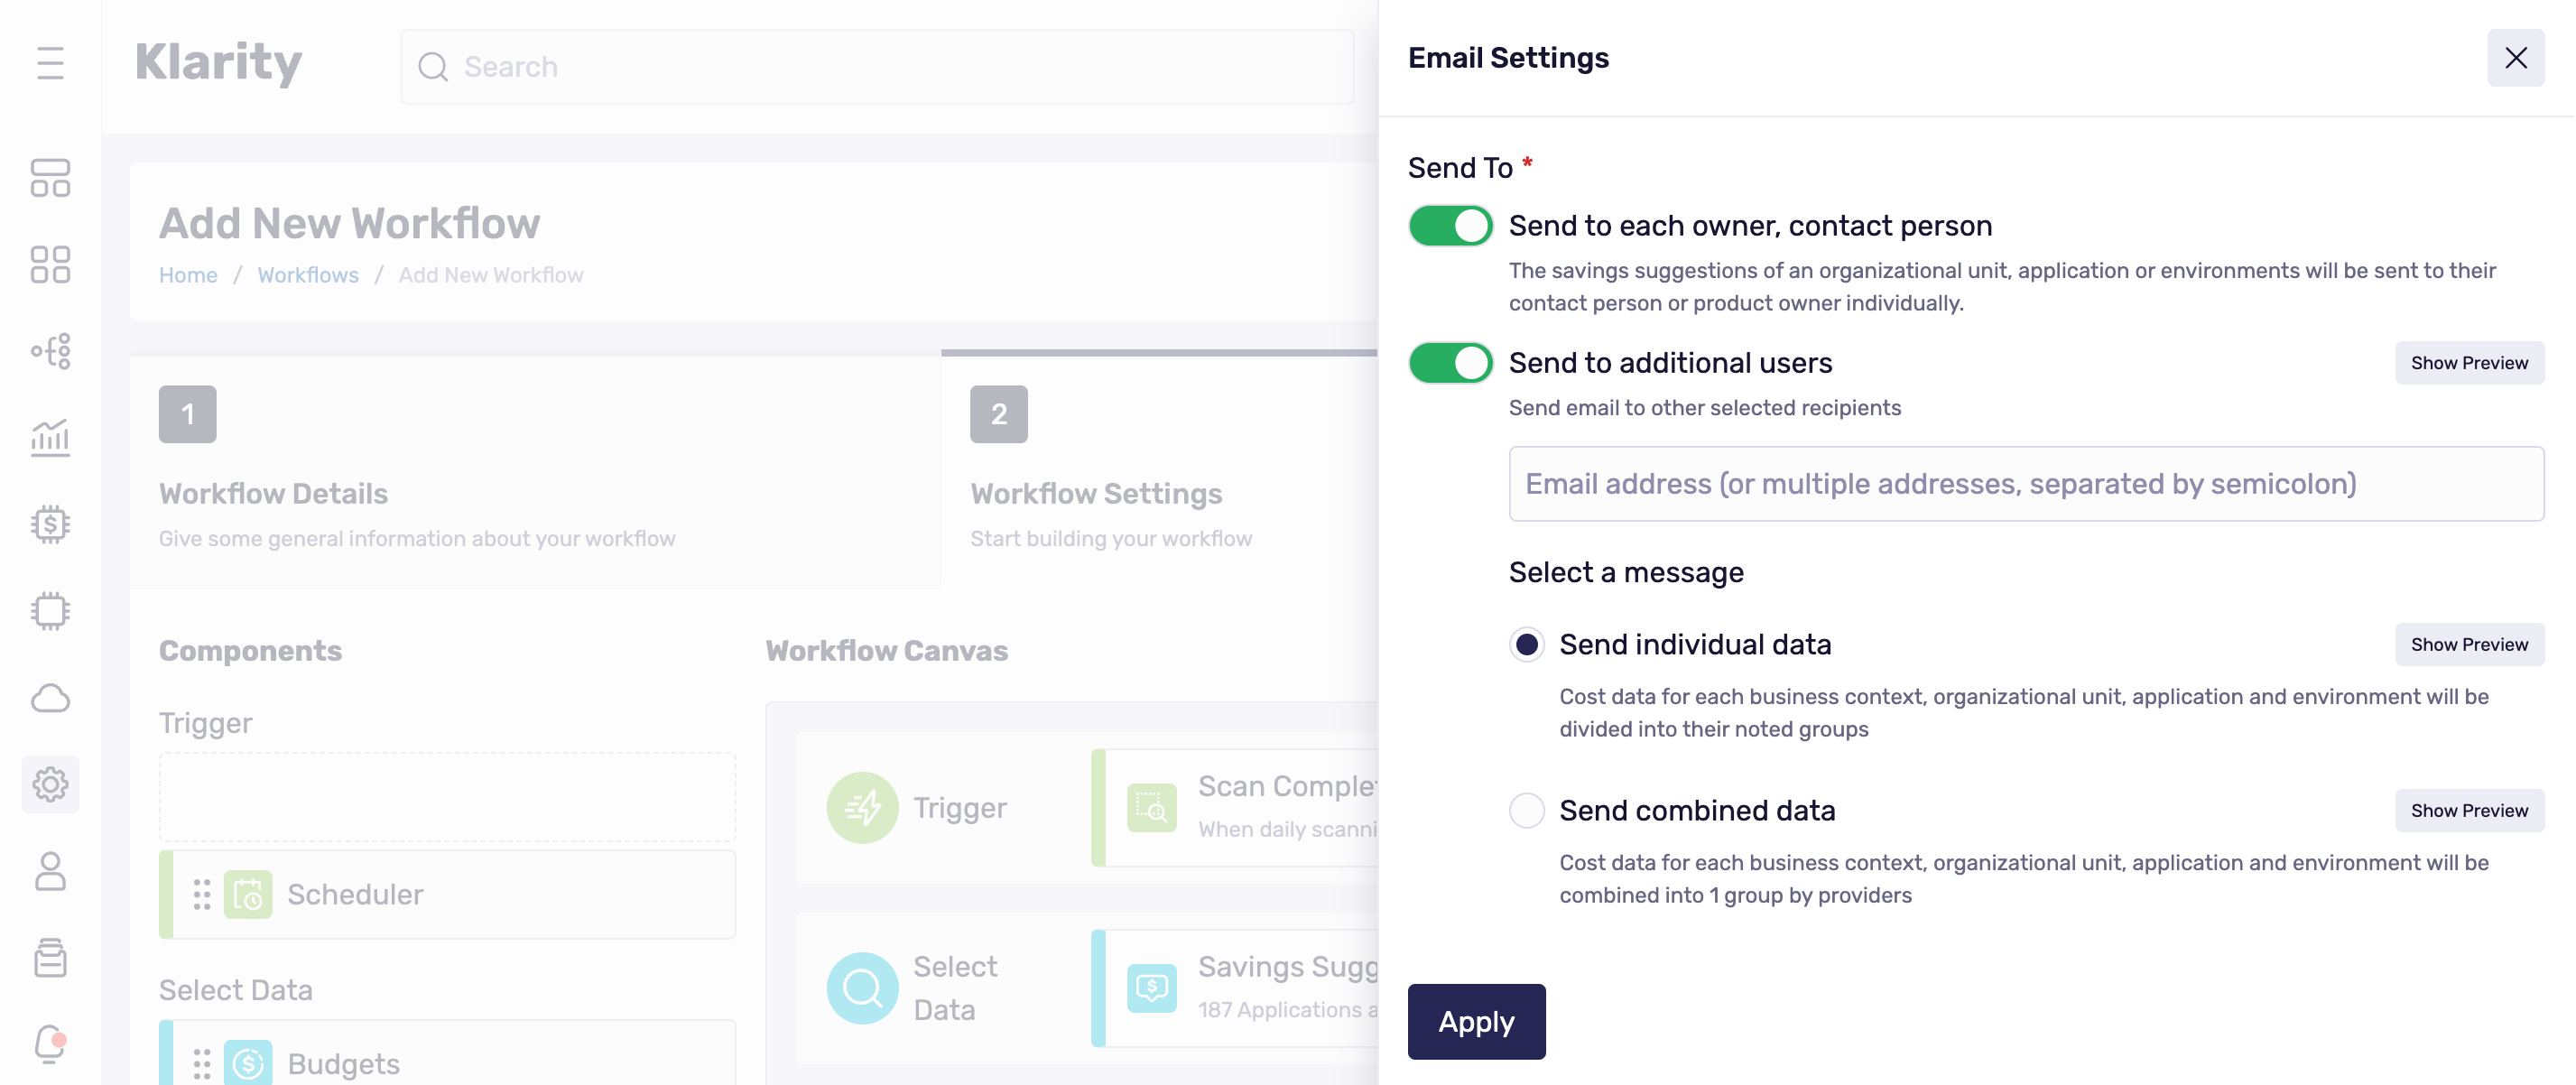 ss-email-settings